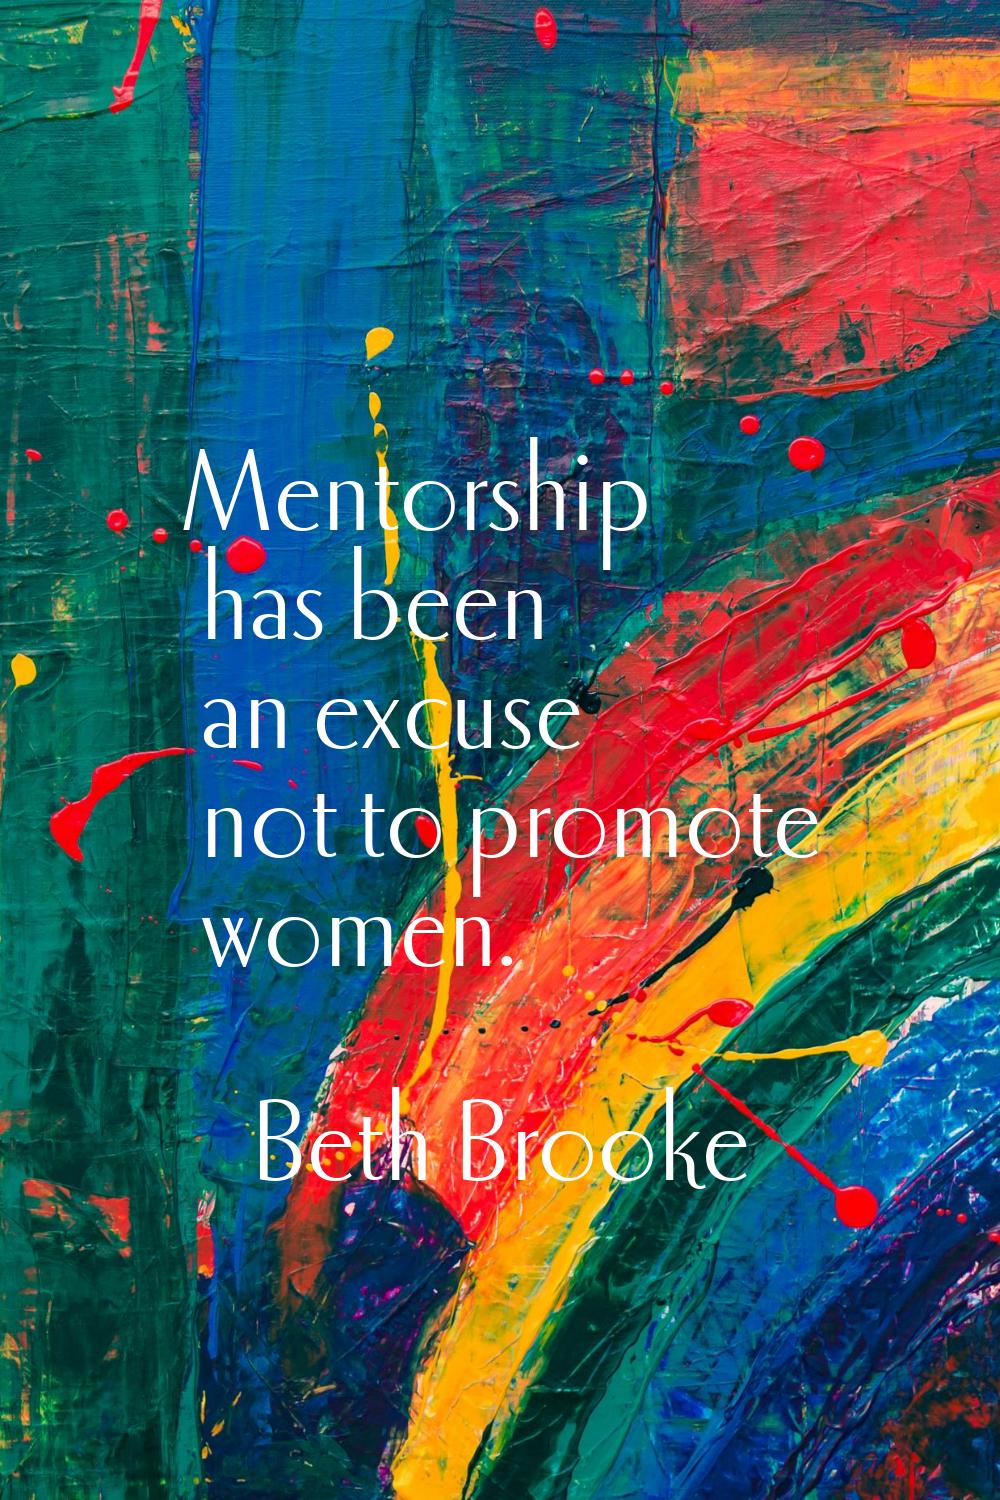 Mentorship has been an excuse not to promote women.